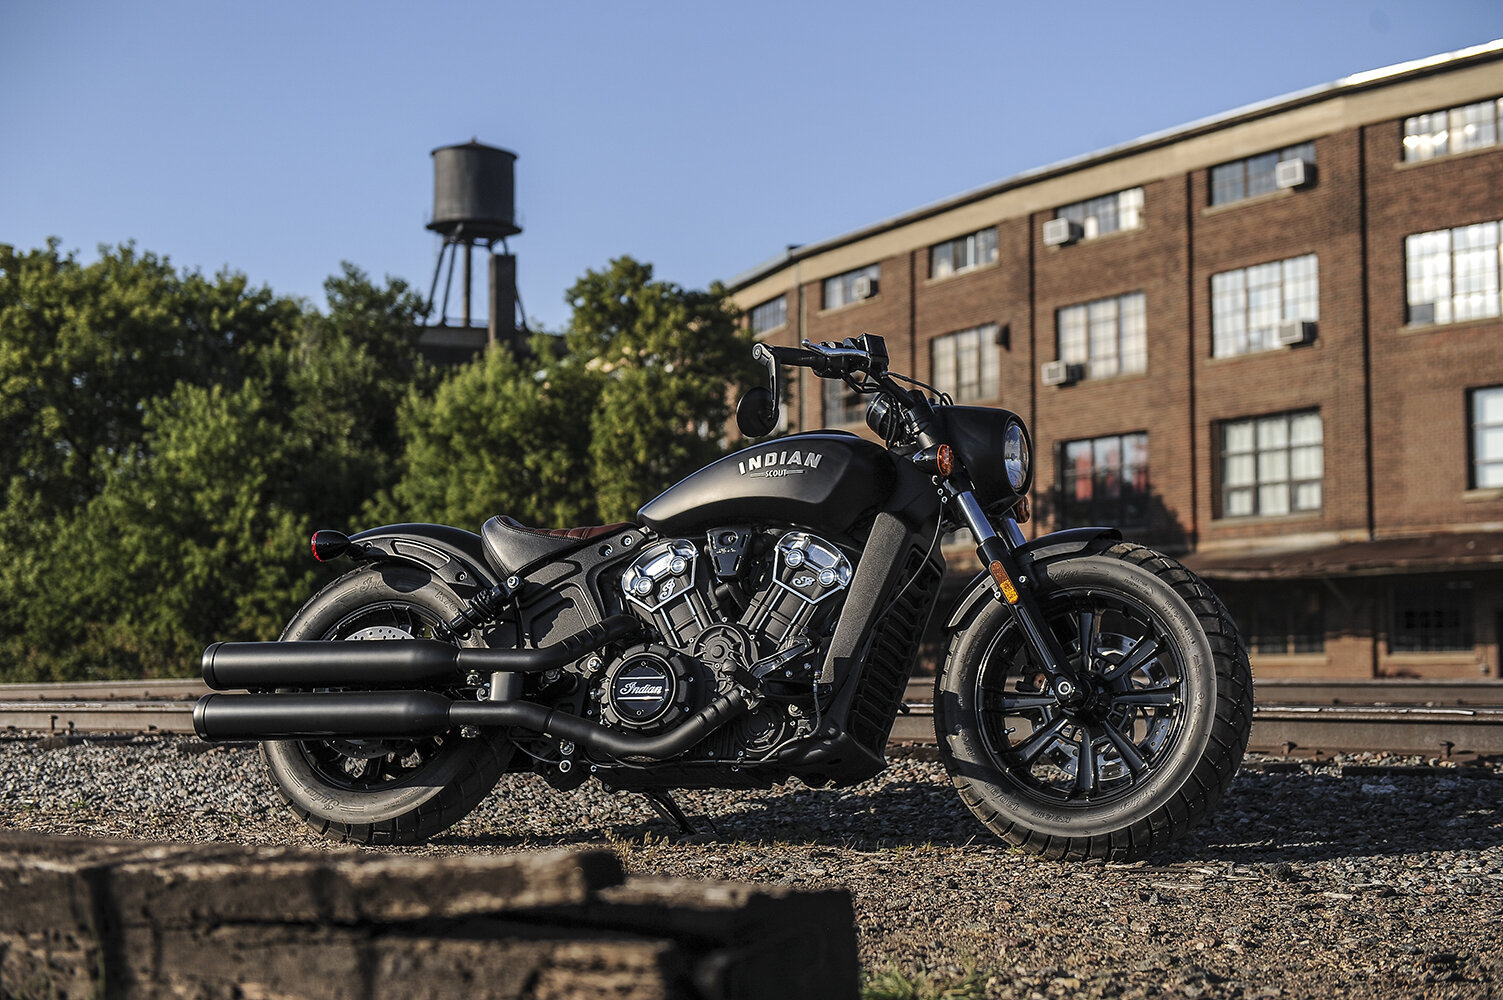 All black Indian Scout Bobber parked next to train tracks - a sleek and powerful motorcycle perfect for cruising through urban and rural landscapes